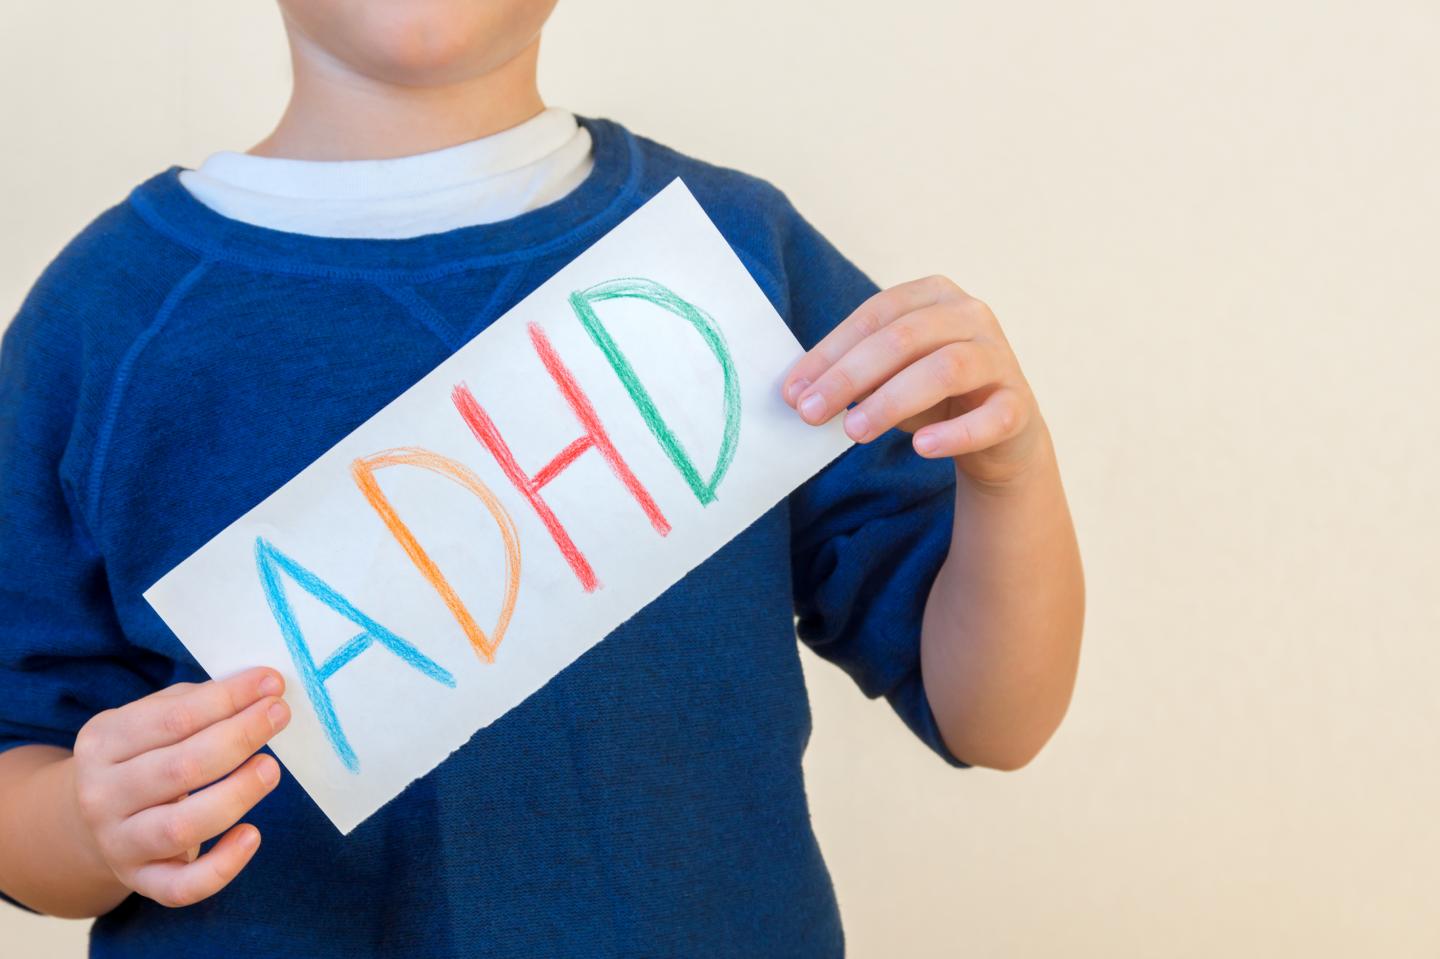 Researchers have revealed the key factors that can improve outcomes in children with ADHD